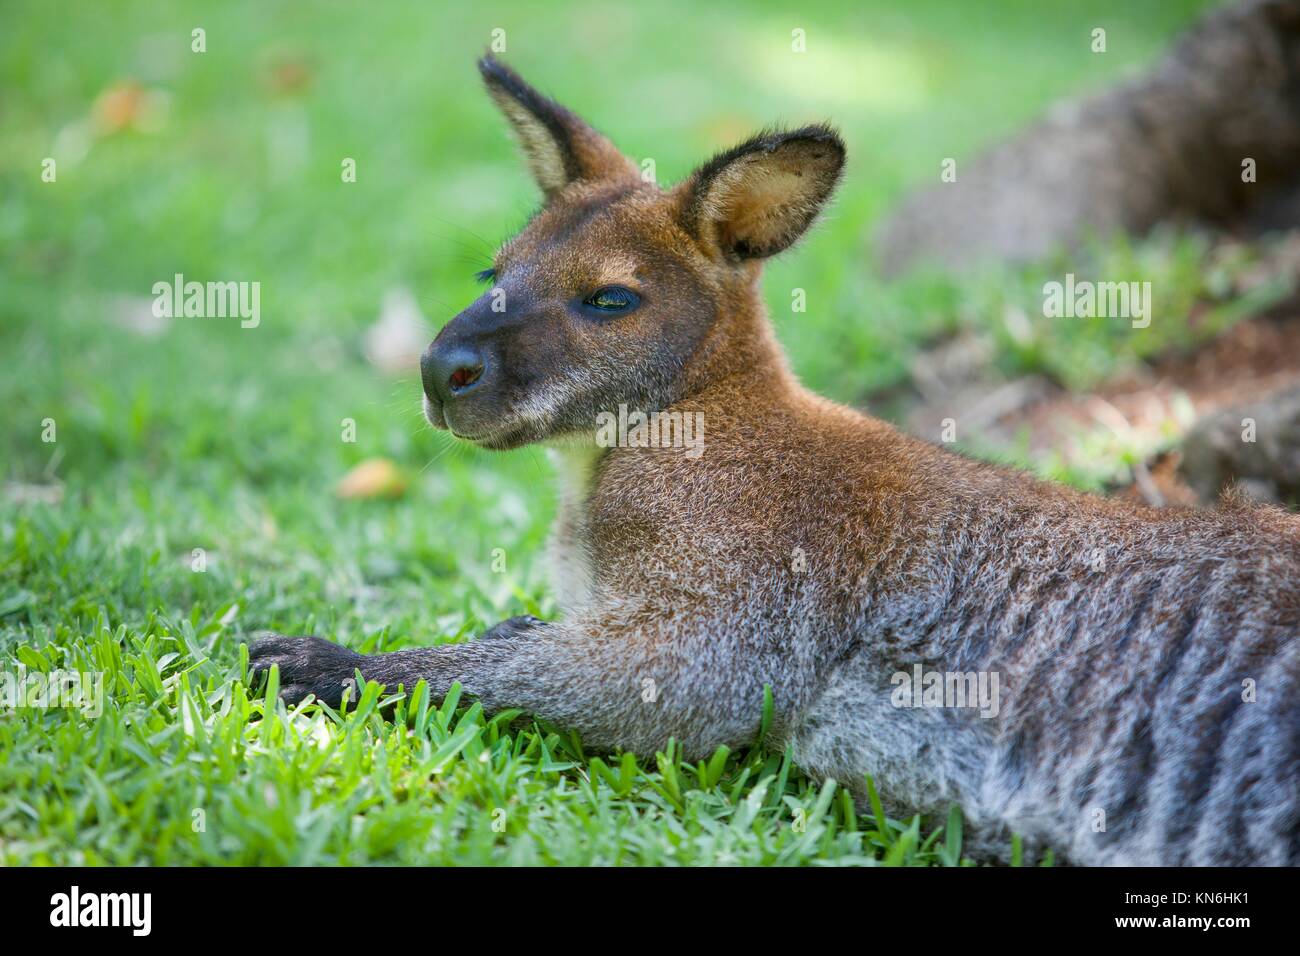 Wallaby sleep on grass in natural park. Stock Photo